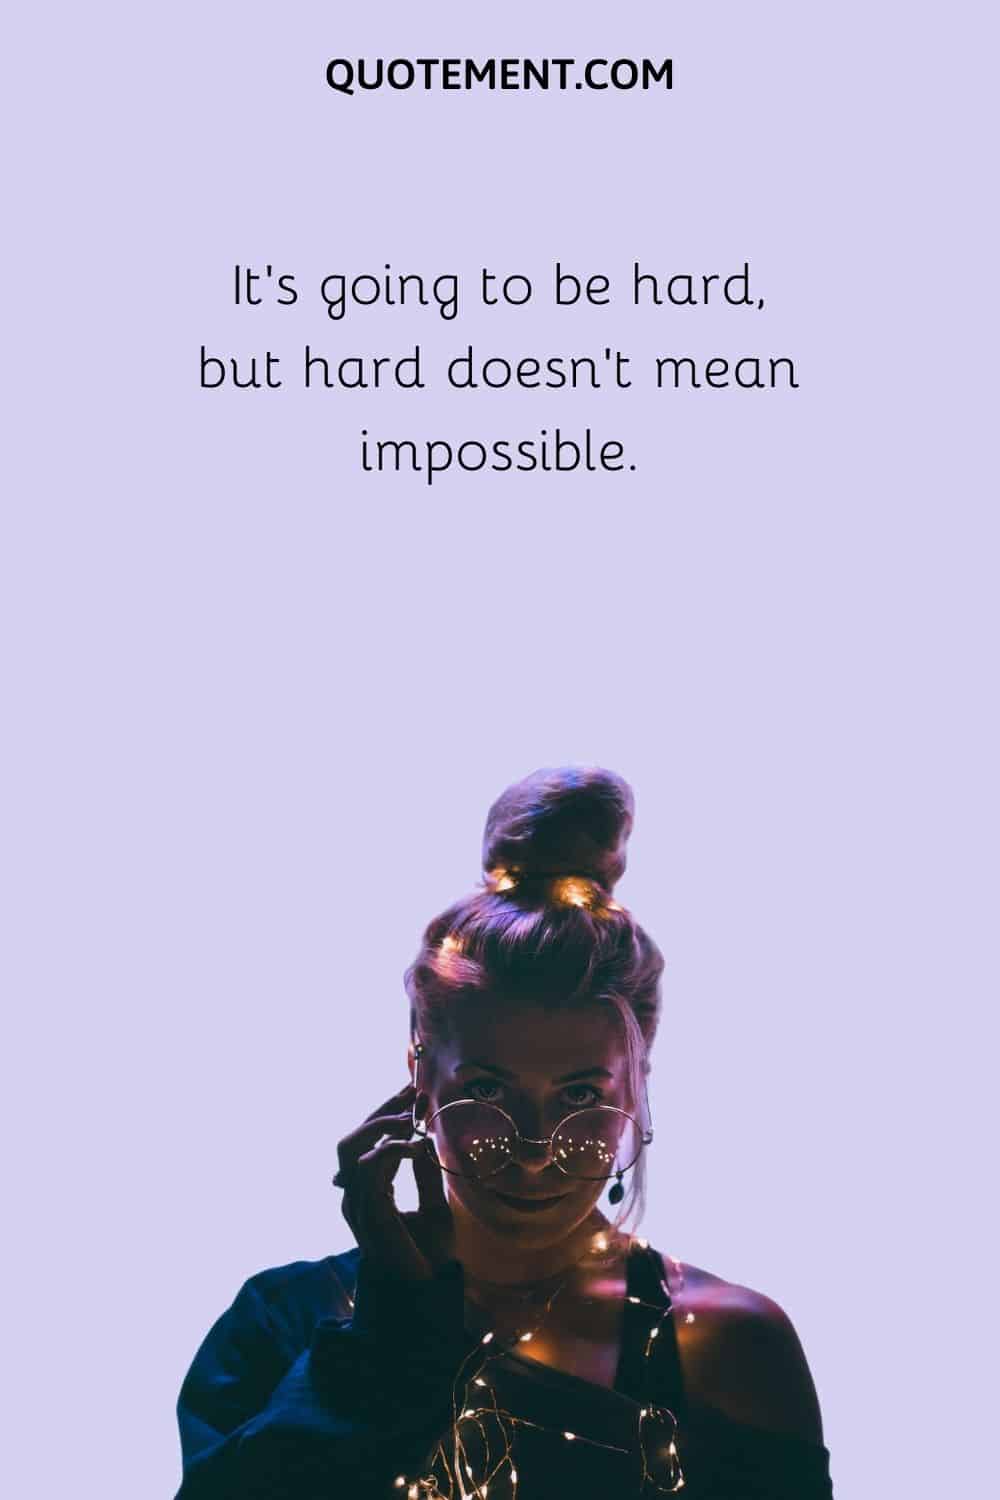 It’s going to be hard, but hard doesn’t mean impossible